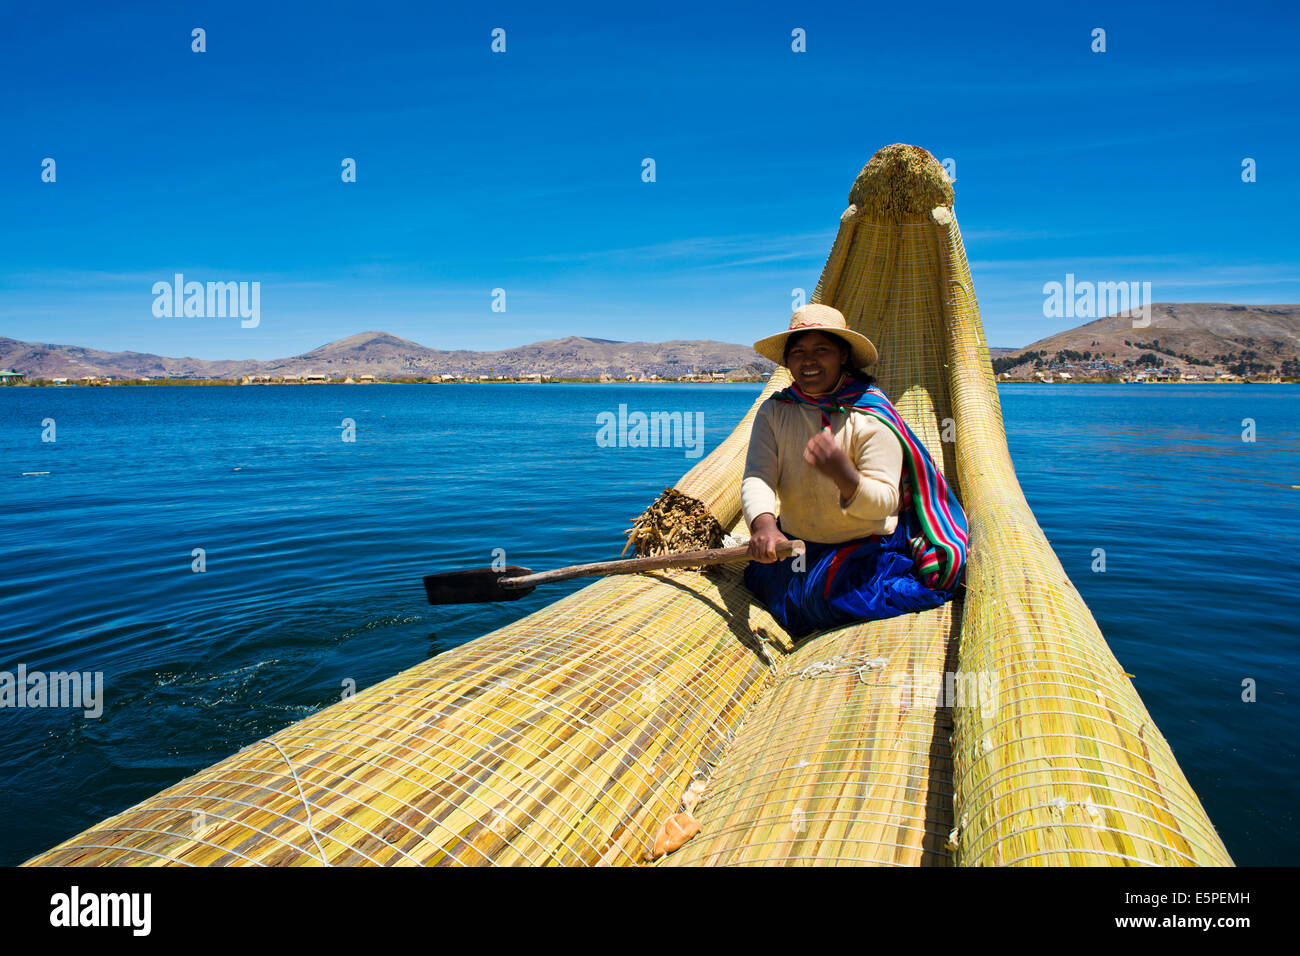 Local in a traditional rowing boat of Totora reed on Lake Titicaca, Peru Stock Photo